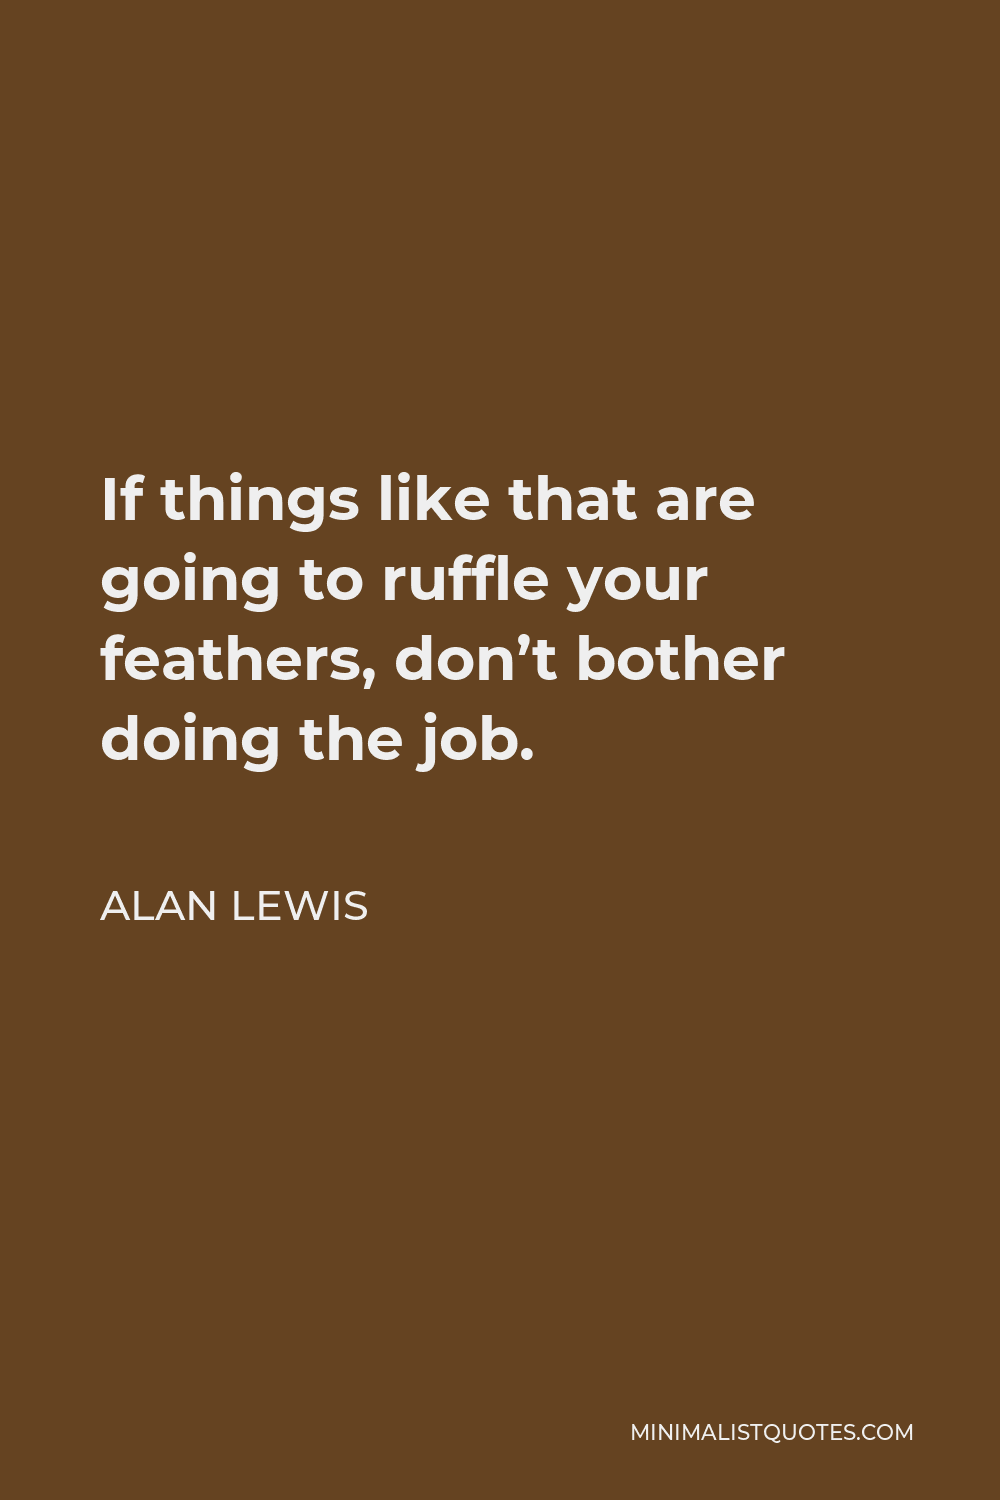 Alan Lewis Quote - If things like that are going to ruffle your feathers, don’t bother doing the job.